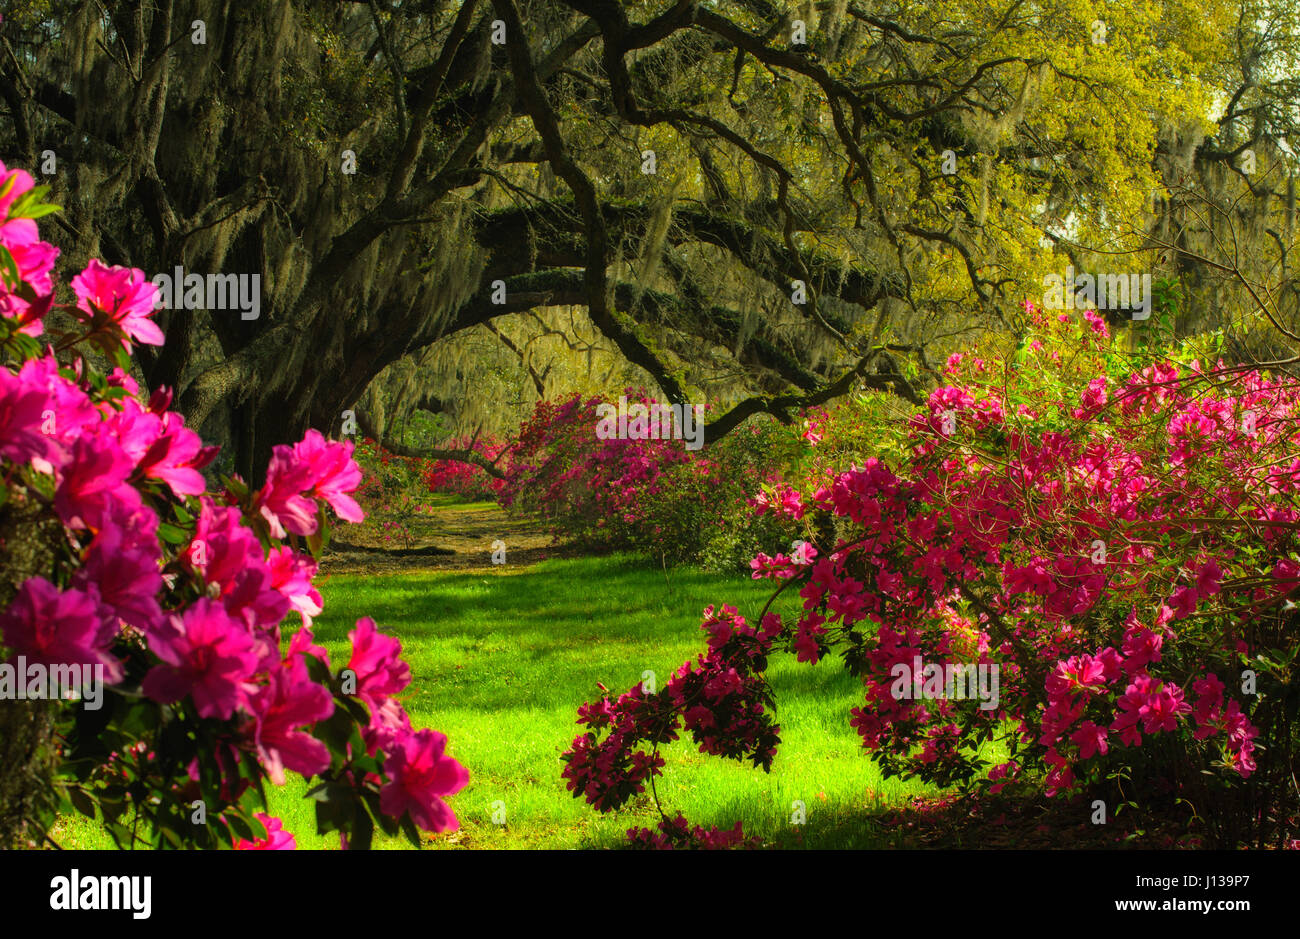 Old Live Oak trees branches dripping with Spanish Moss curve over the Azalea gardens beneath in the spring in South Carolina. Stock Photo